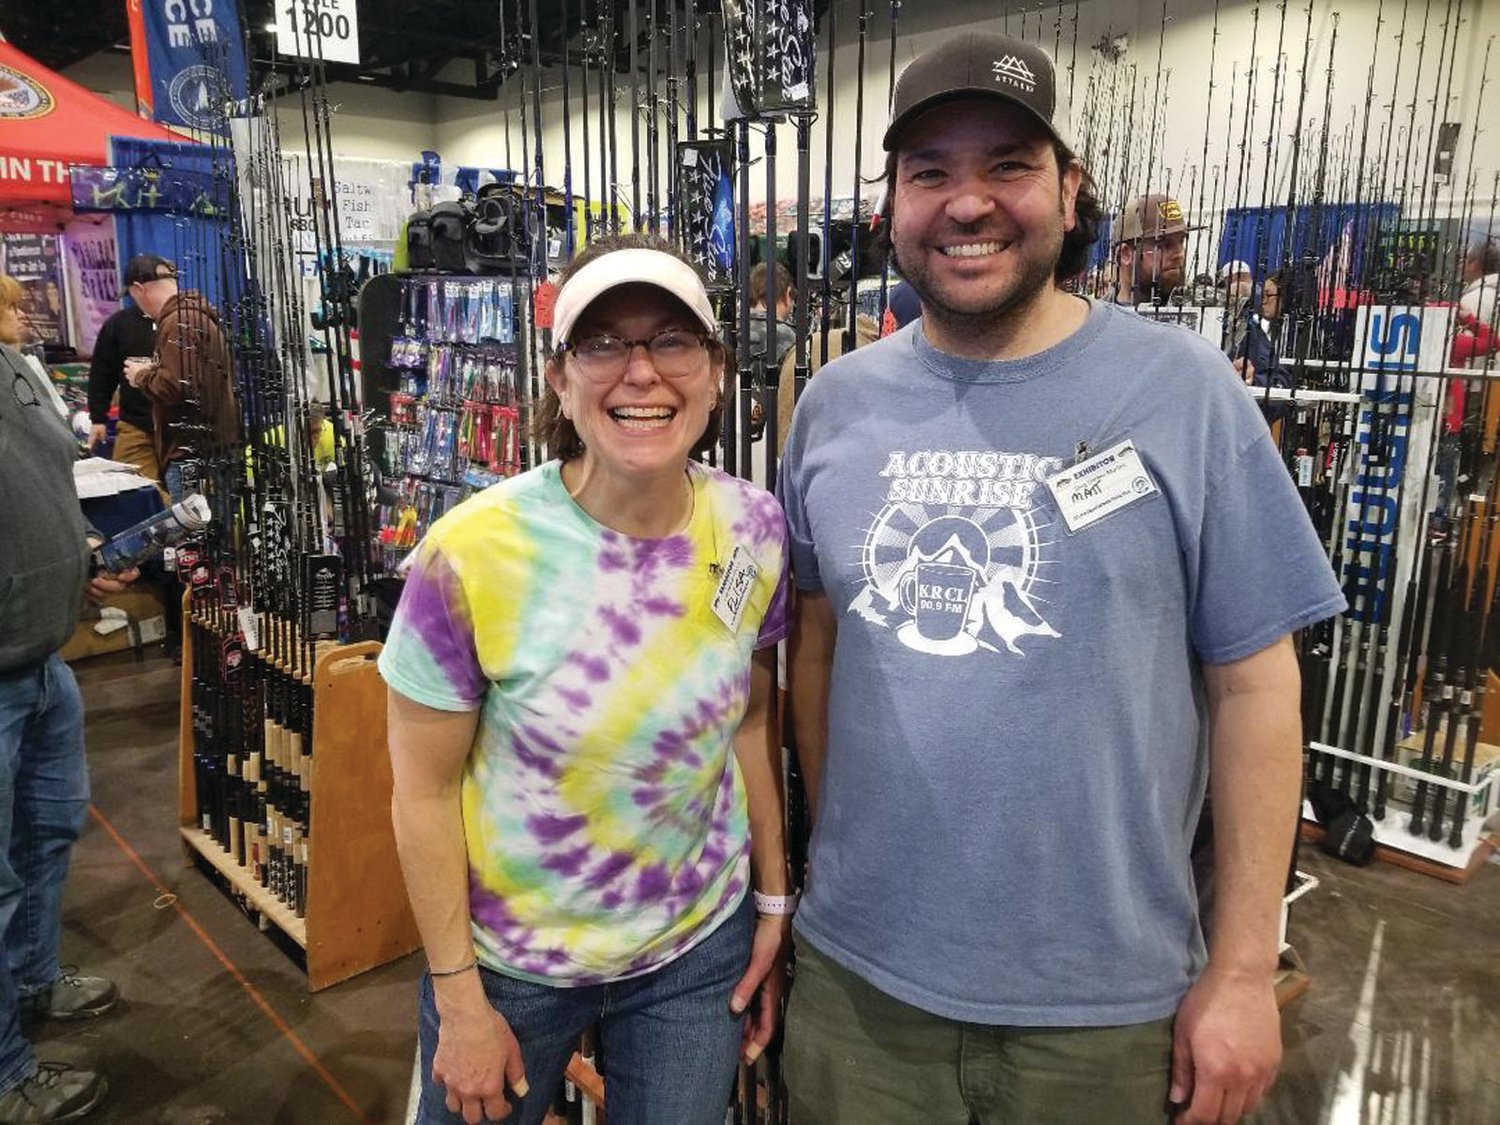 FISHING SHOW: Elisa Cahill and her bother Matt Conti of Snug Harbor Marina, South Kingstown. Elisa said traffic at the show was outstanding. (Submitted photos)